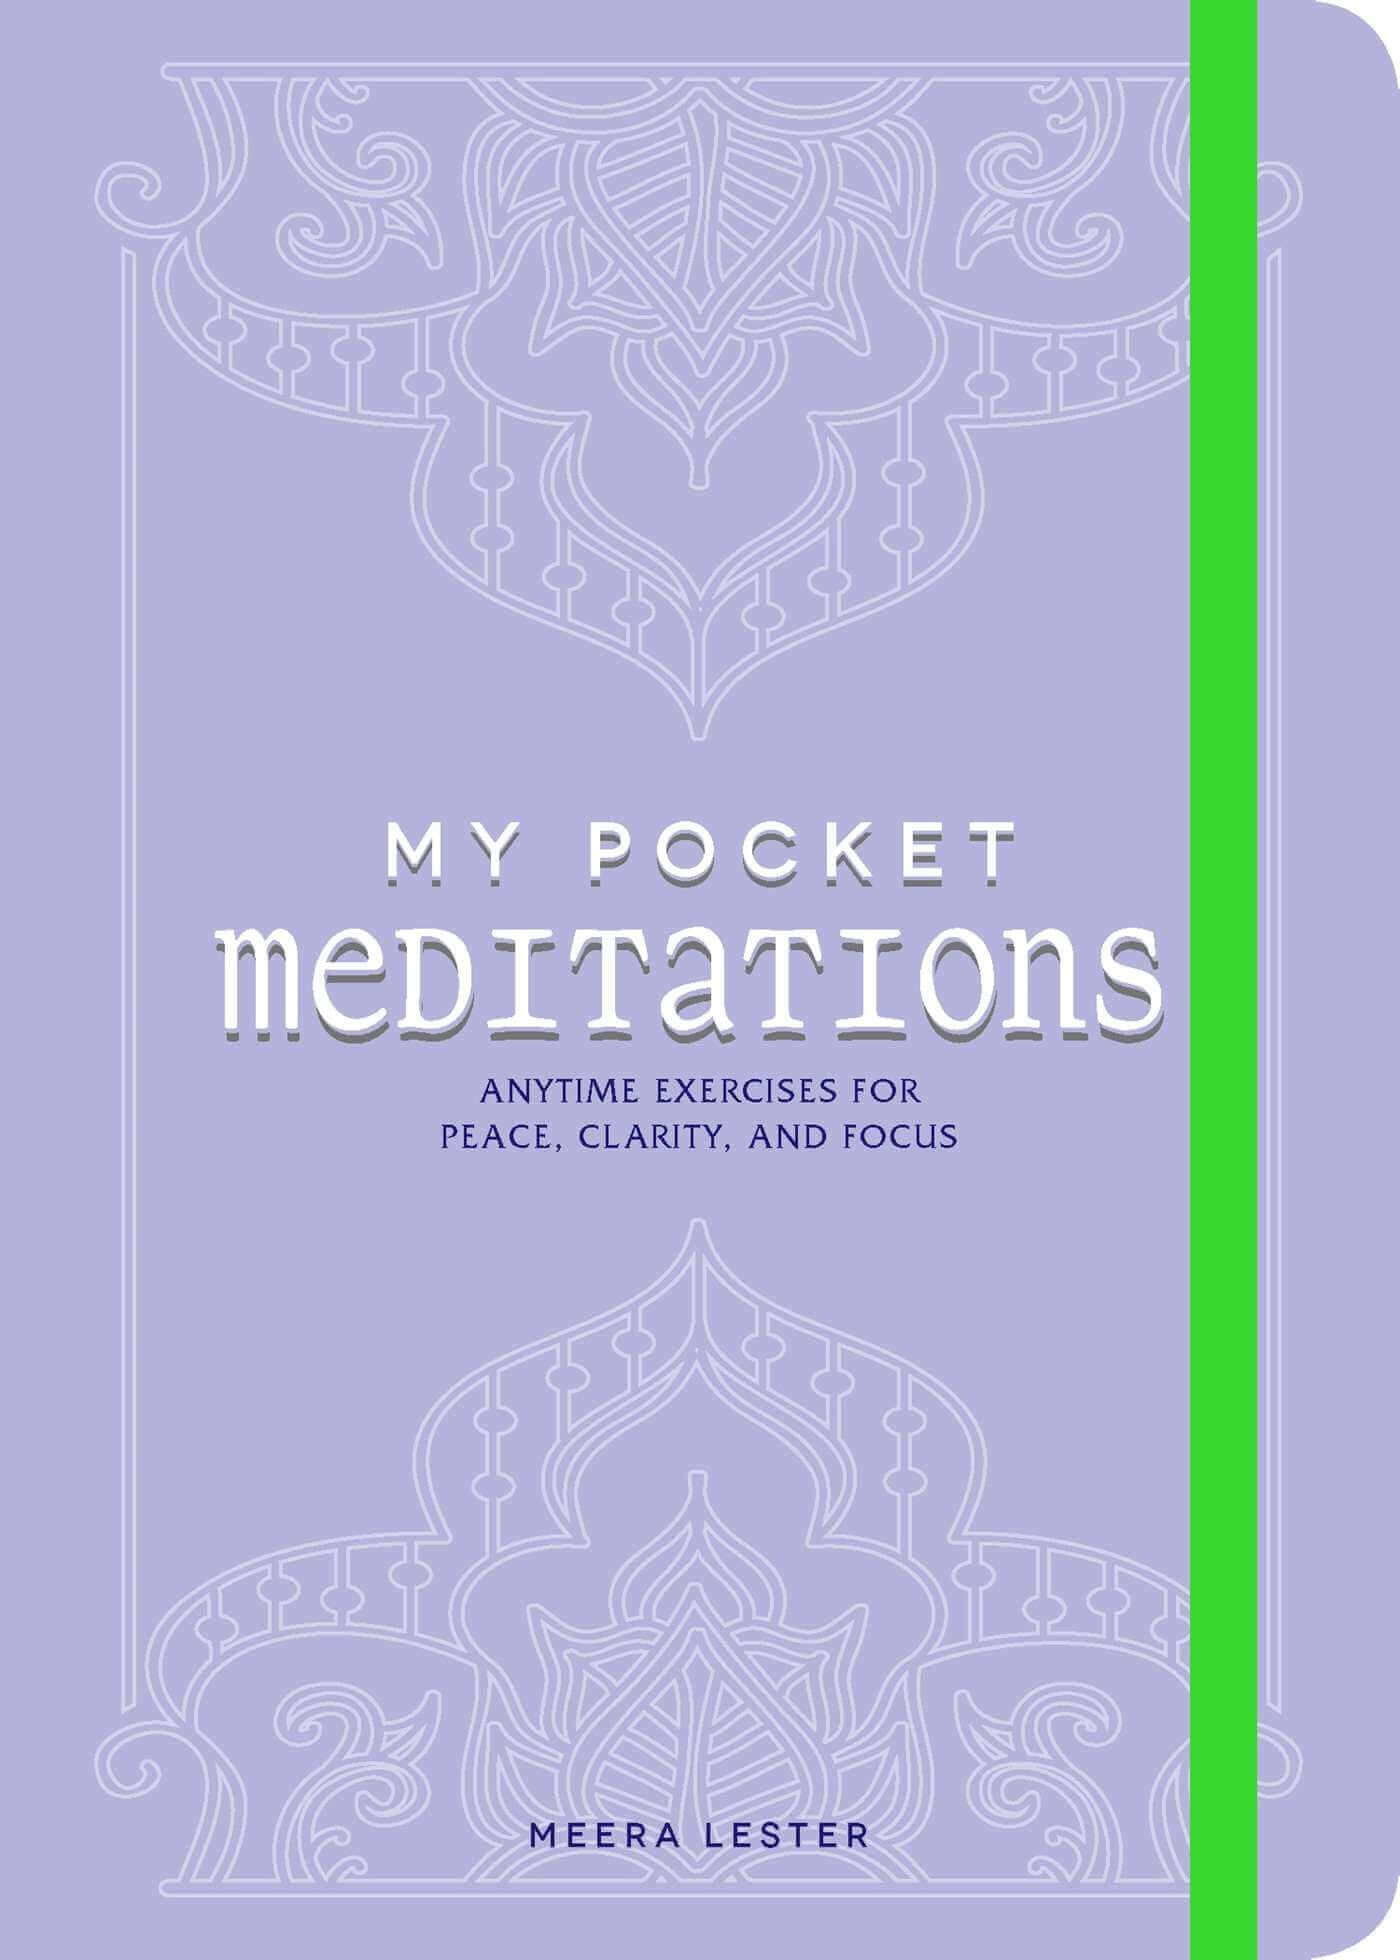 MY POCKET MEDITATIONS: ANYTIME EXERCISES FOR PEACE, CLARITY, AND FOCUS at $15 only from Spiral Rain